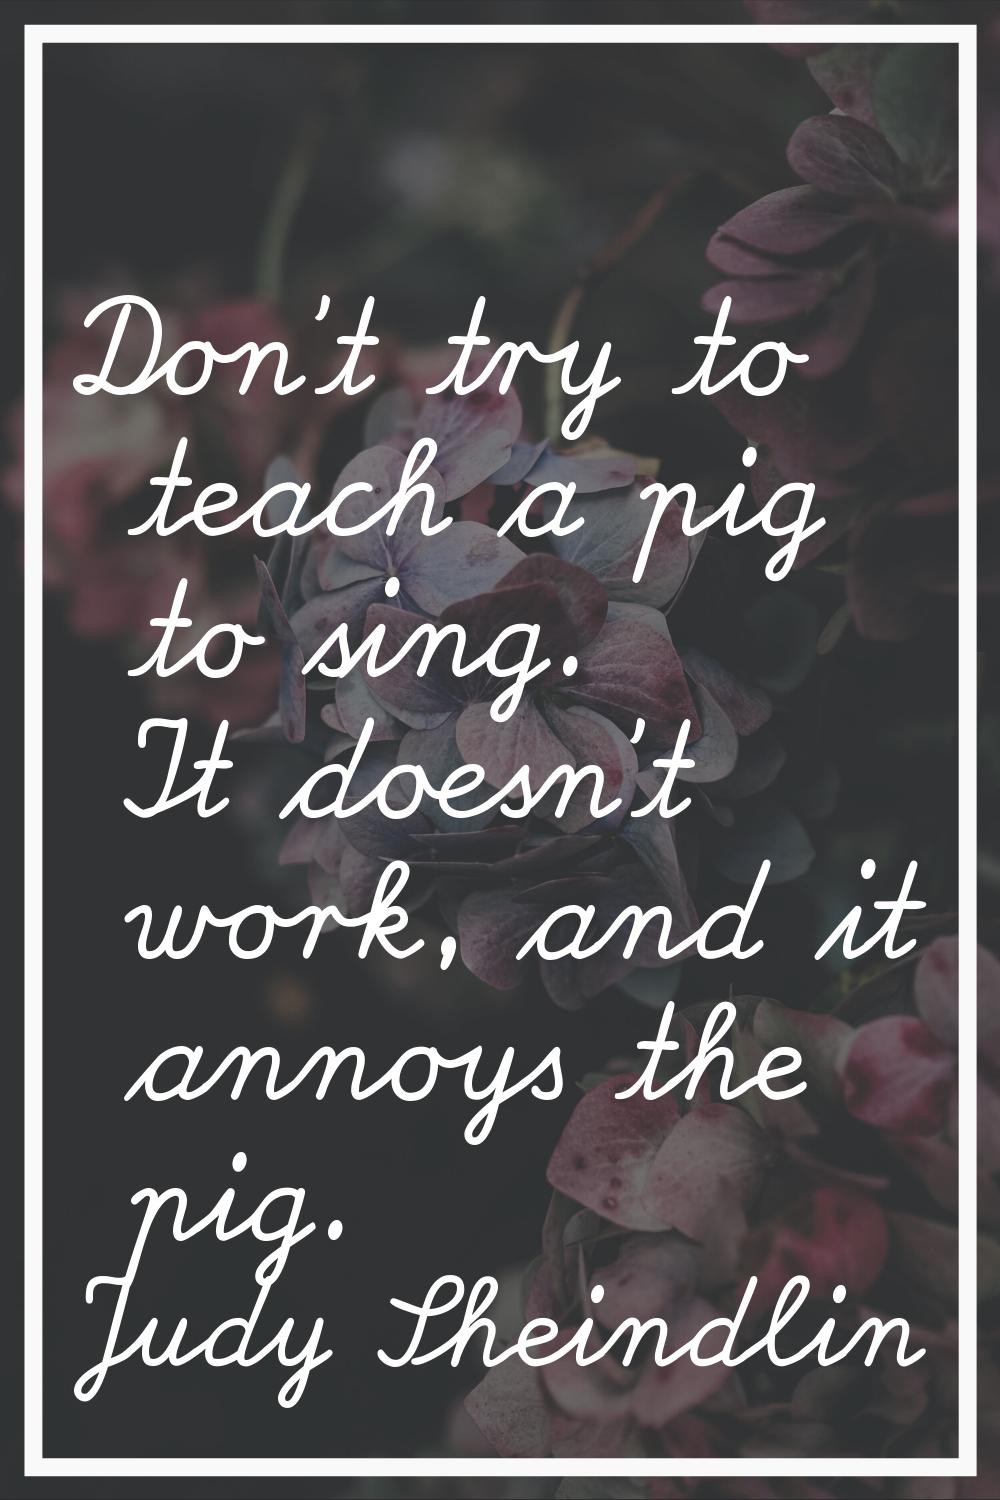 Don't try to teach a pig to sing. It doesn't work, and it annoys the pig.